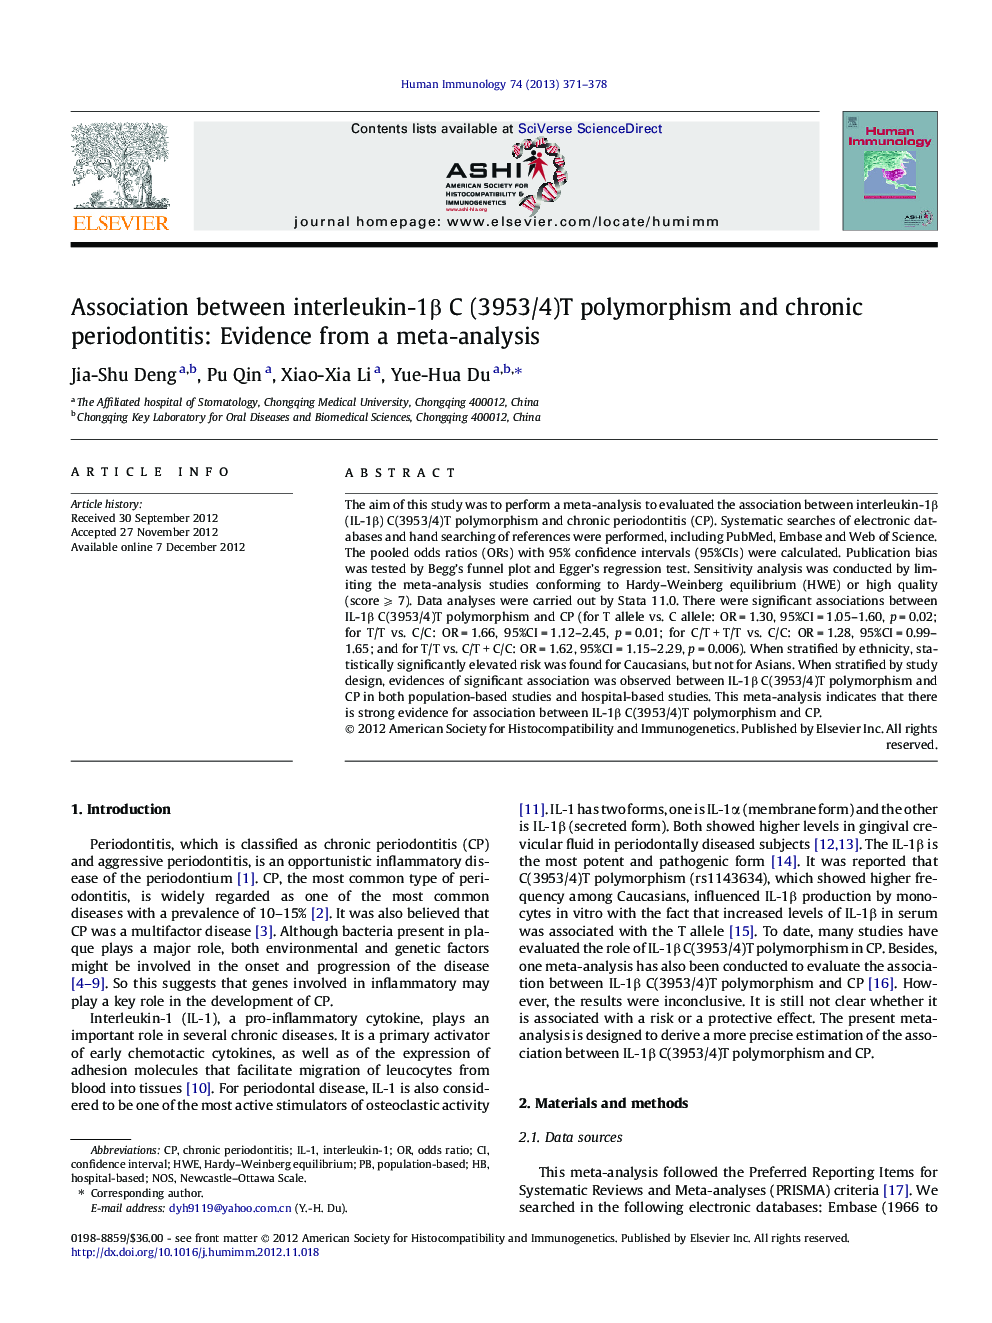 Association between interleukin-1Î² C (3953/4)T polymorphism and chronic periodontitis: Evidence from a meta-analysis